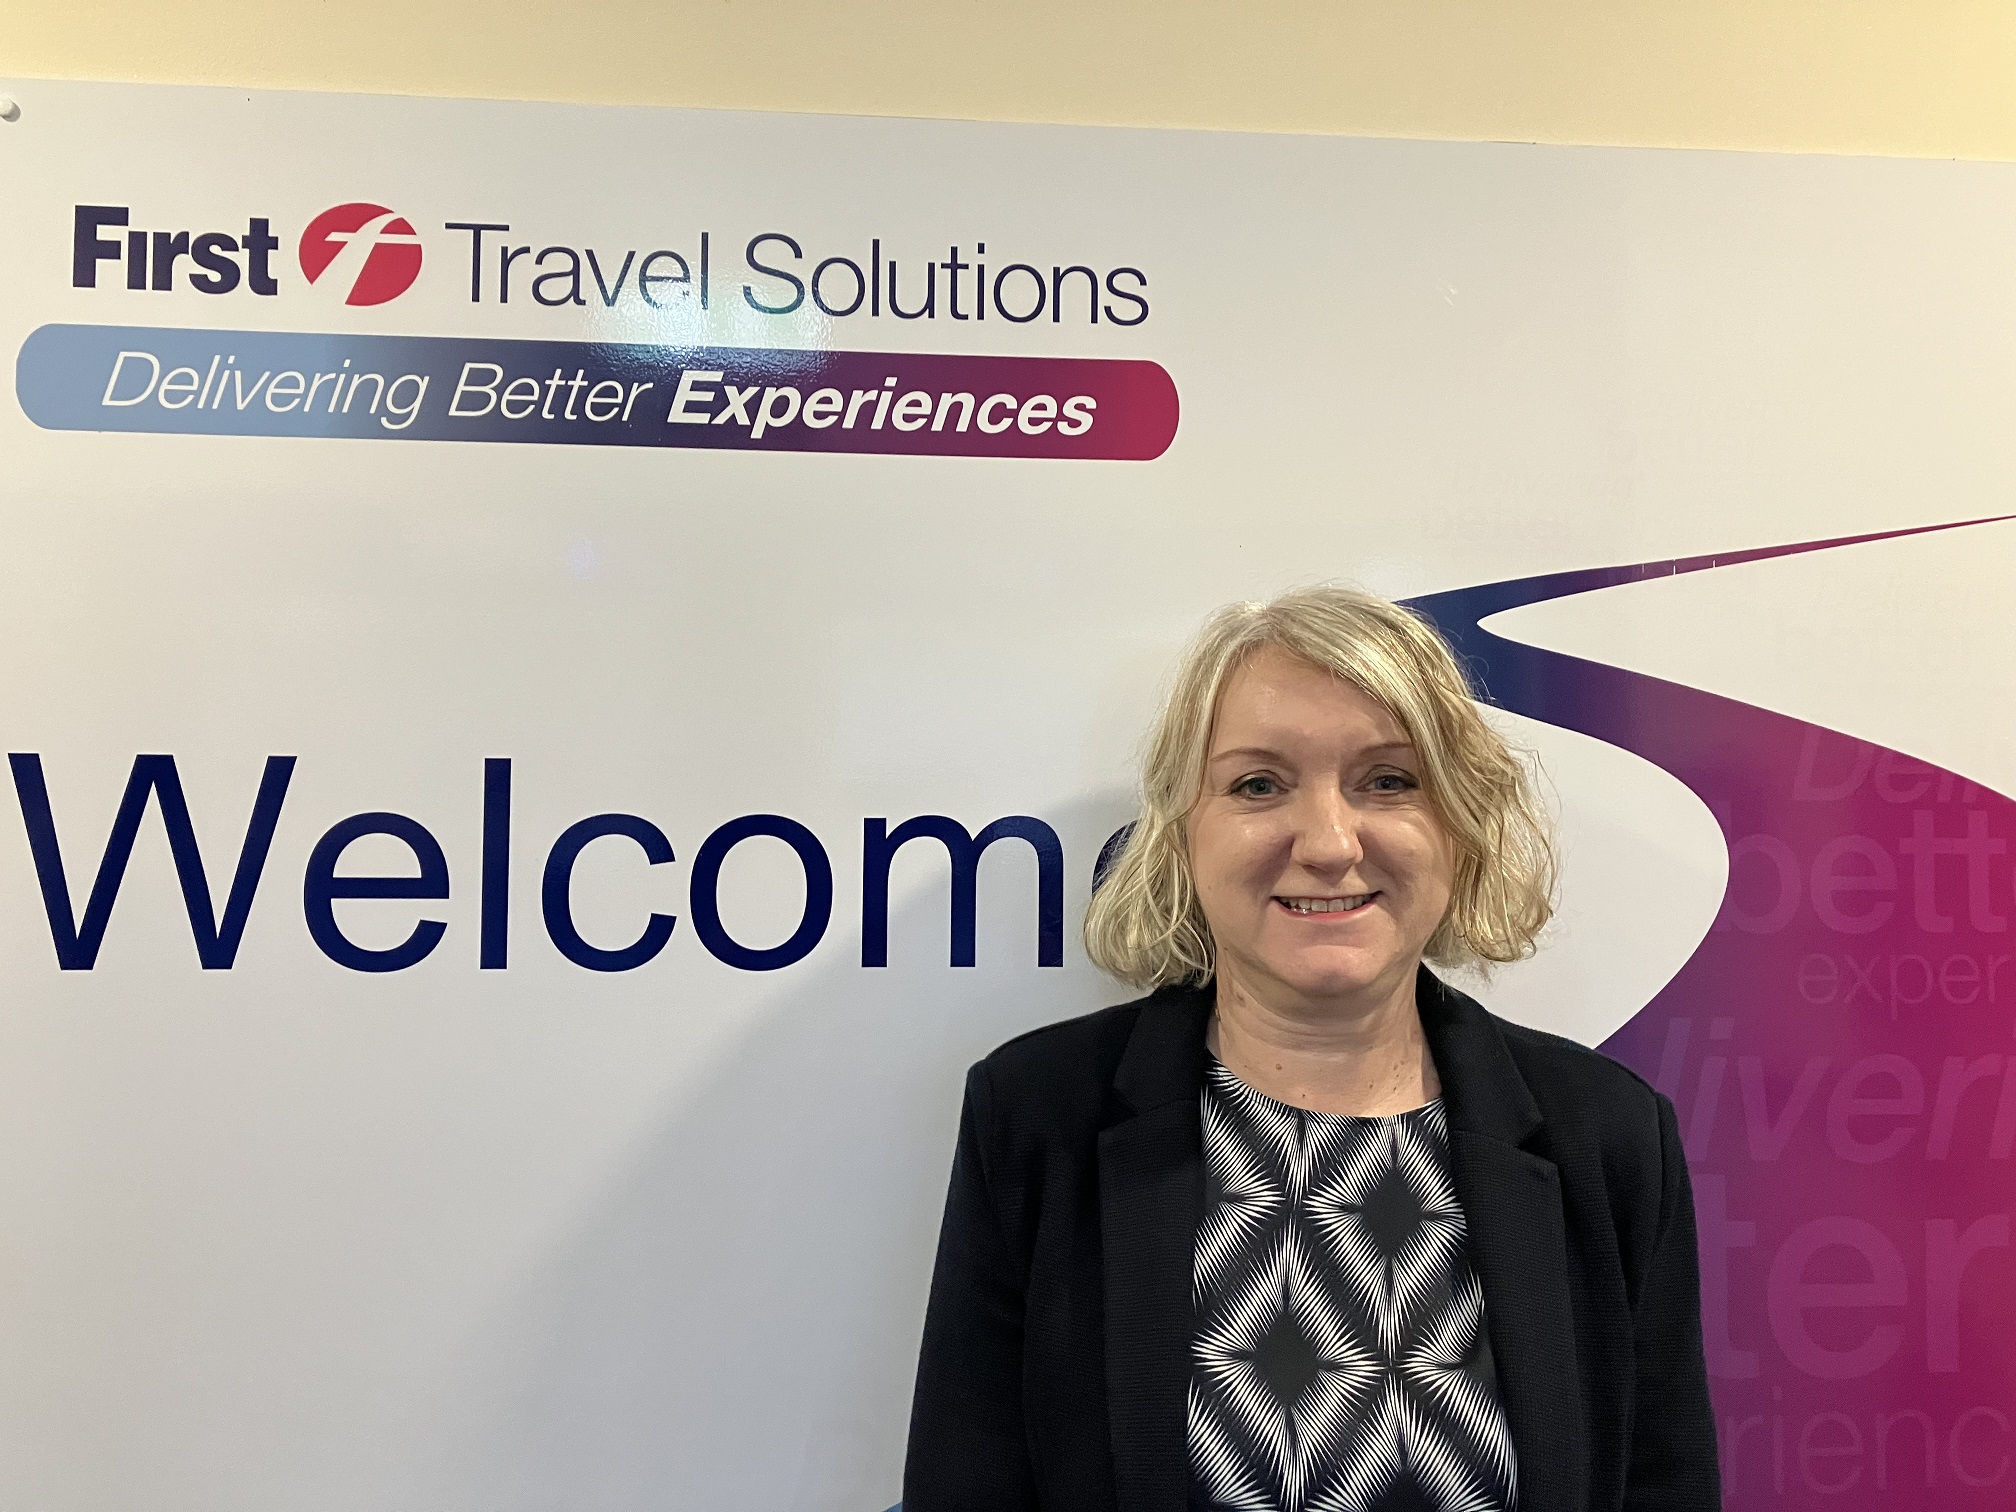 Katie Johnson joins First Travel Solutions